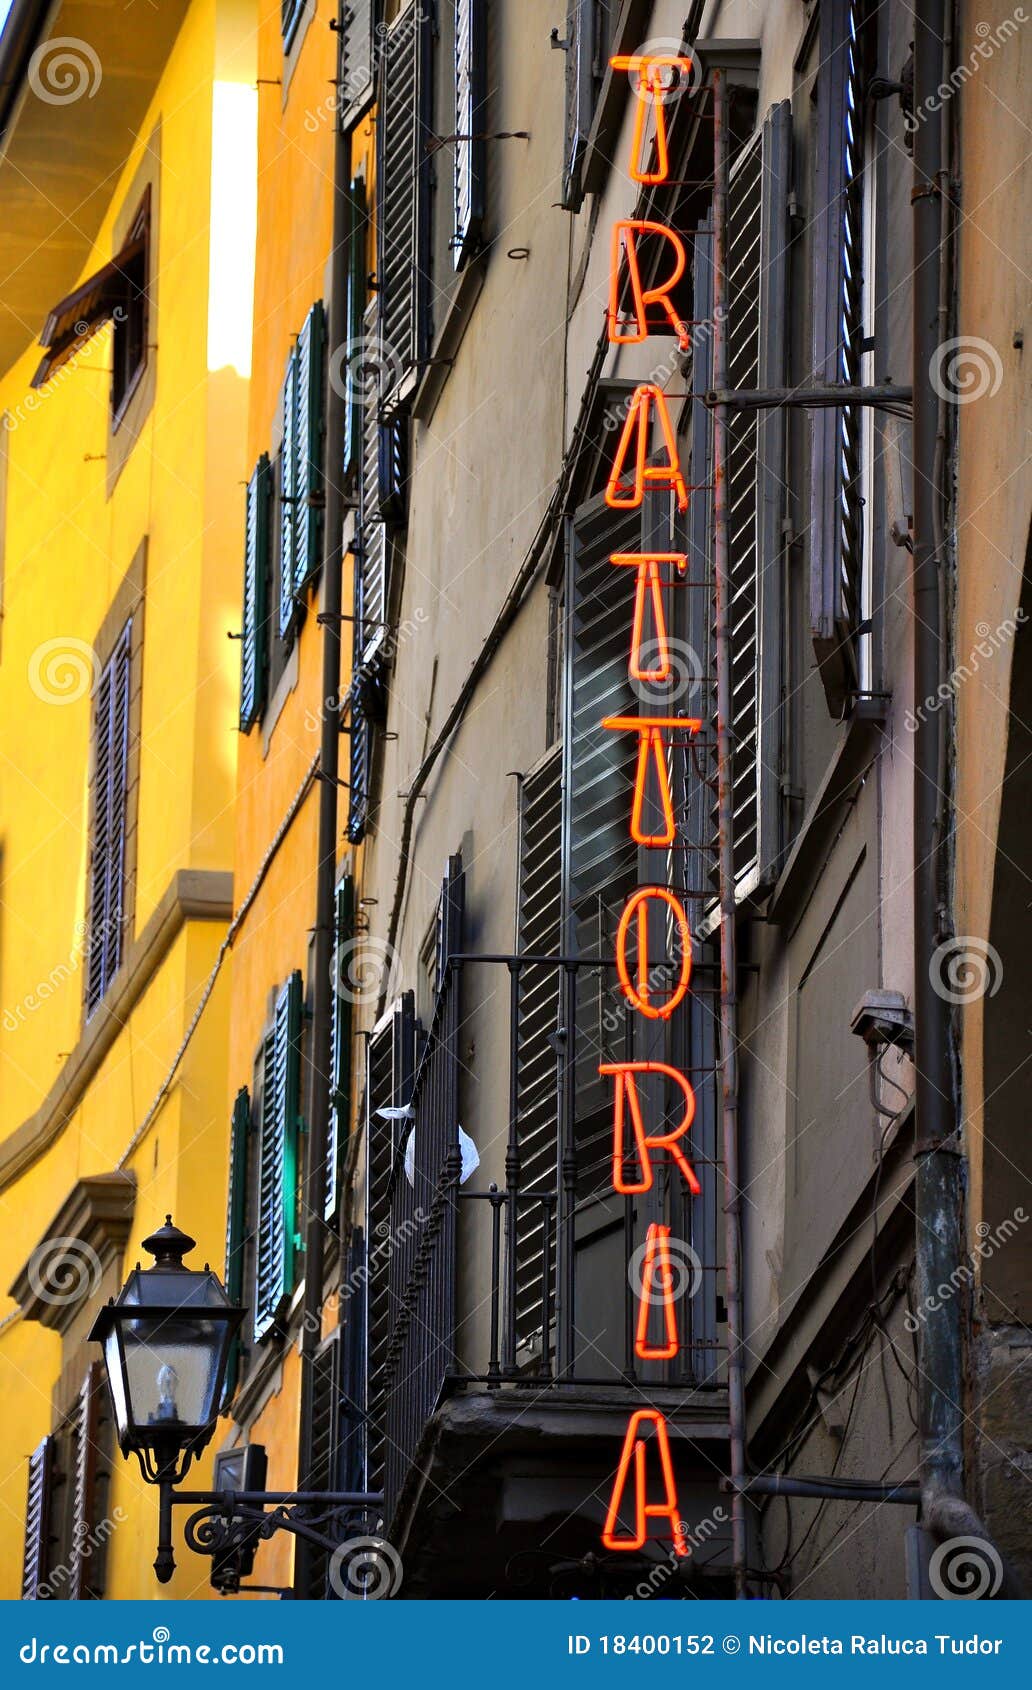  Trattoria sign  in Italy stock photo Image of craftman 